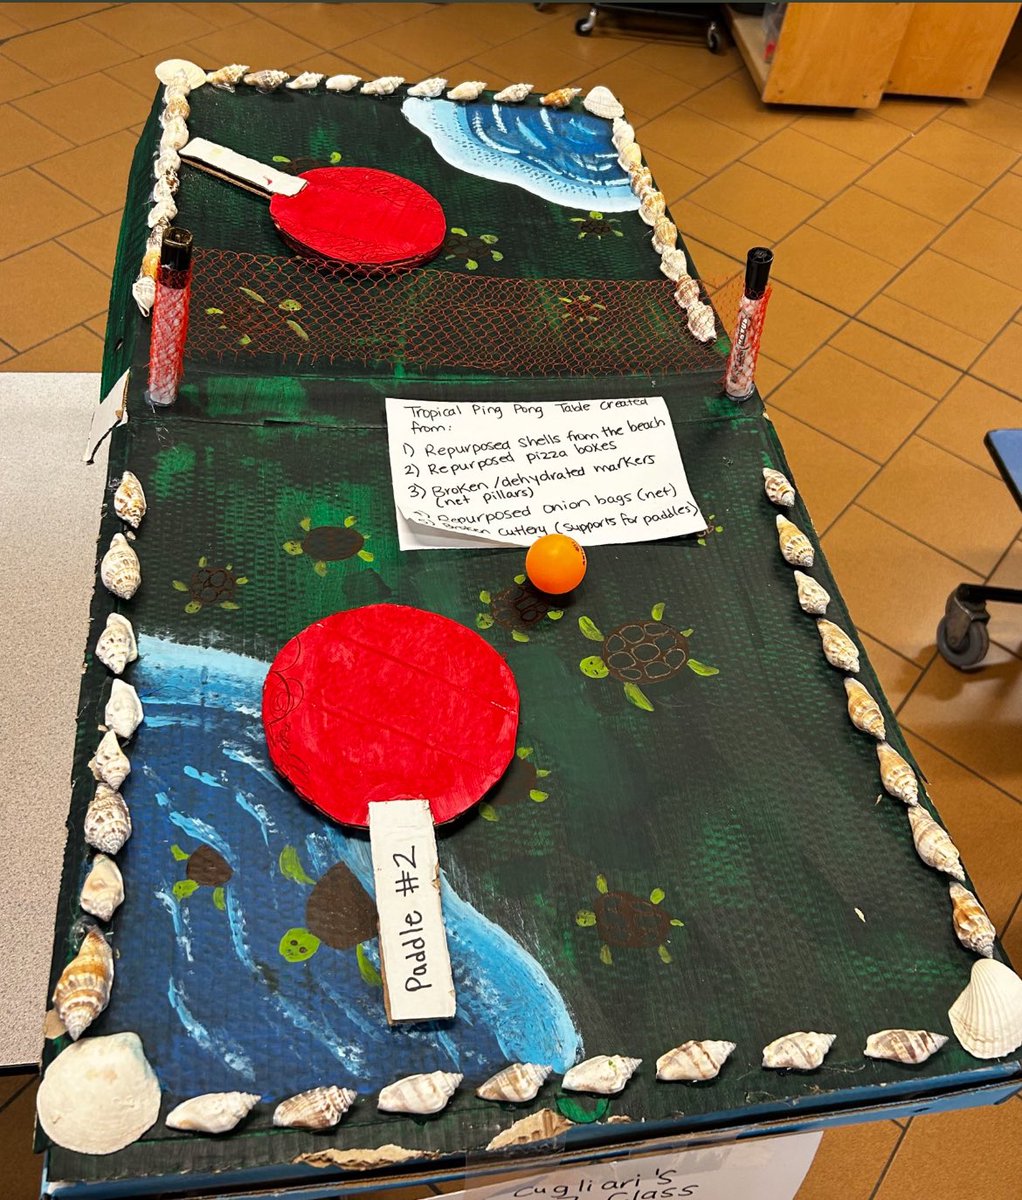 Intermediate STEAM challenge winner: 

Ms. Cugliari’s class tropical ping-pong table 🏓

Created from repurposed:
 - Pizza boxes (paddles and table base)
- Onion bag (net)
- Dehydrated markers (net poles)
- Shells from the beach (lines)
- Damaged cutlery (supports for paddles)